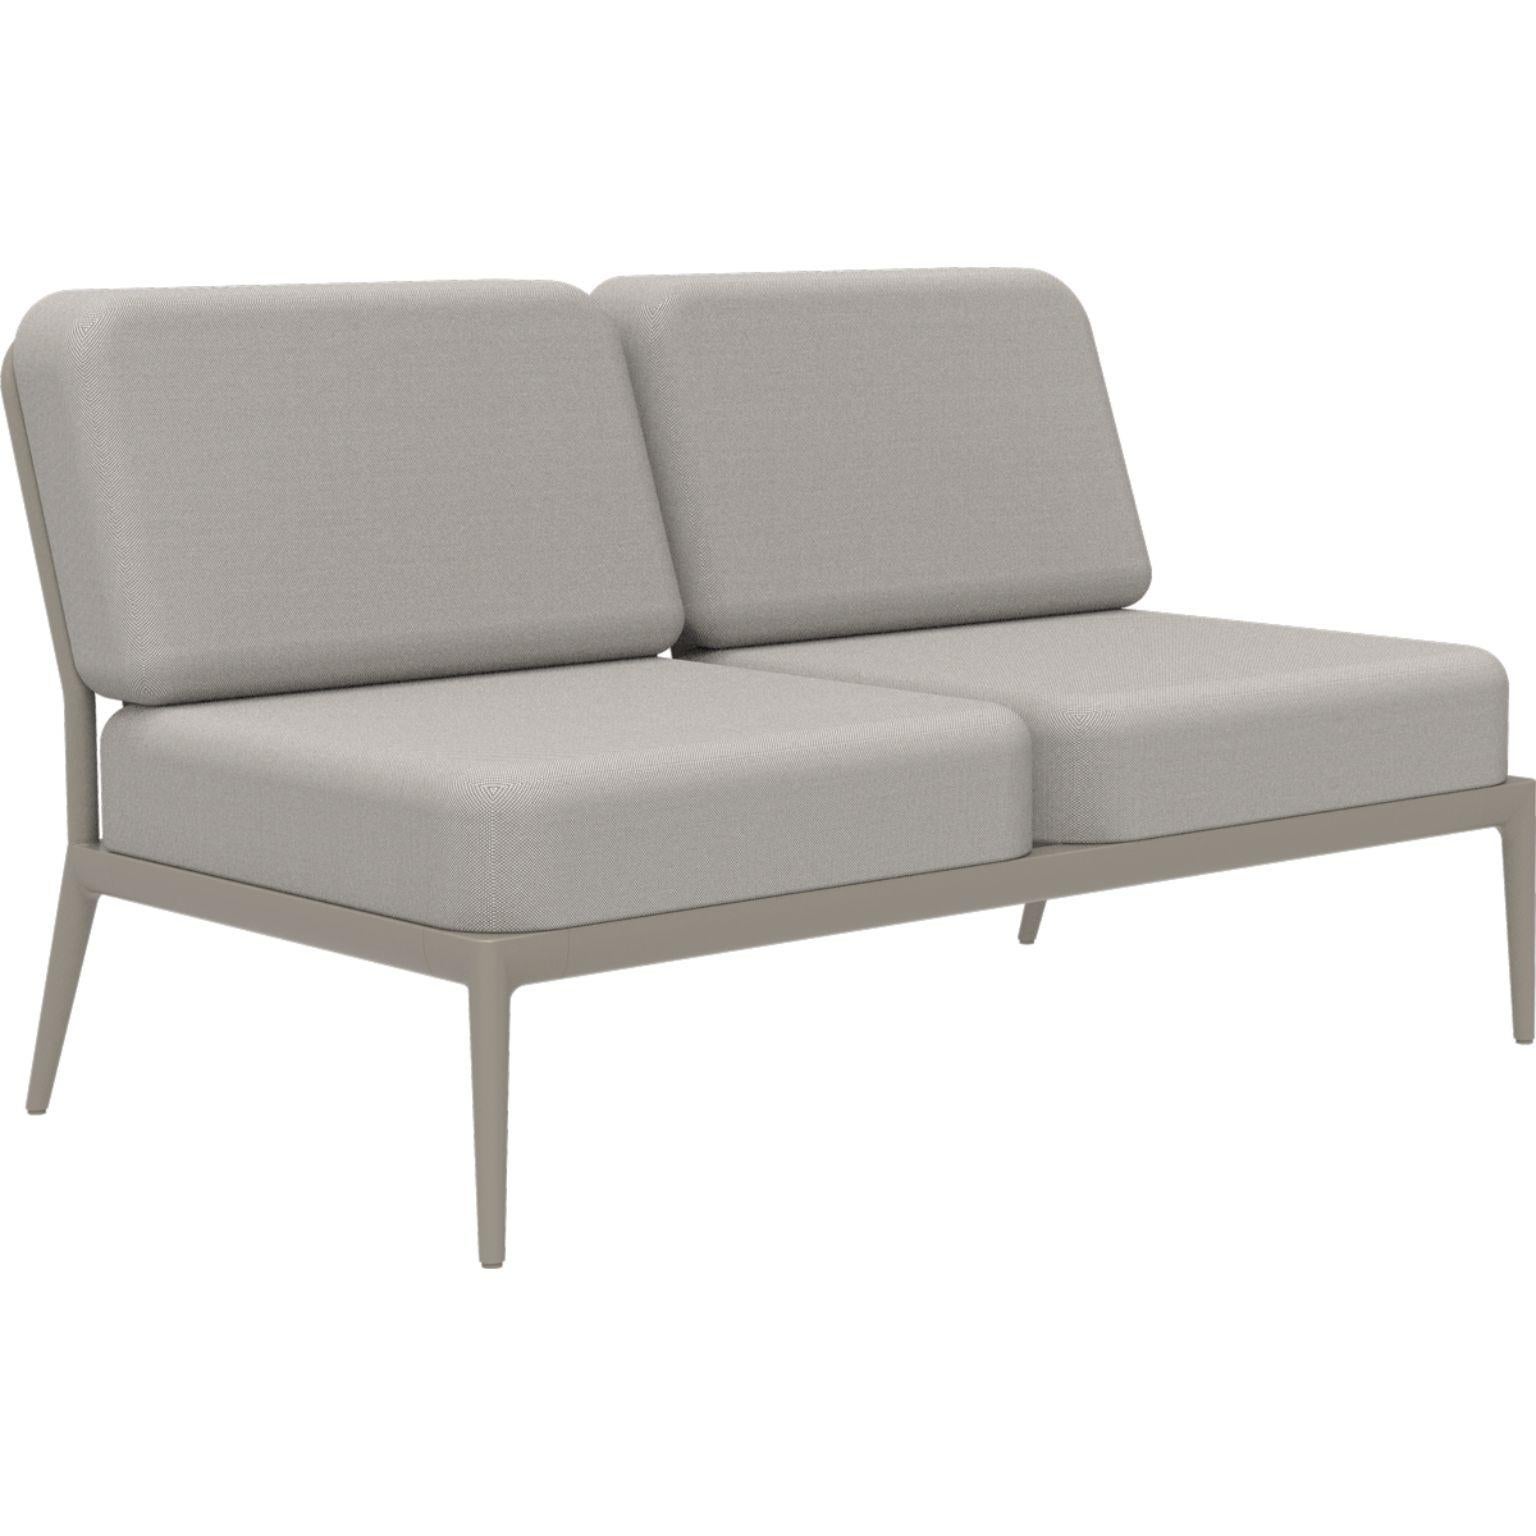 Ribbons Cream Double Central Modular sofa by MOWEE
Dimensions: D83 x W136 x H81 cm
Material: Aluminum, and upholstery.
Weight: 27 kg.
Also available in different colors and finishes.

An unmistakable collection for its beauty and robustness. A